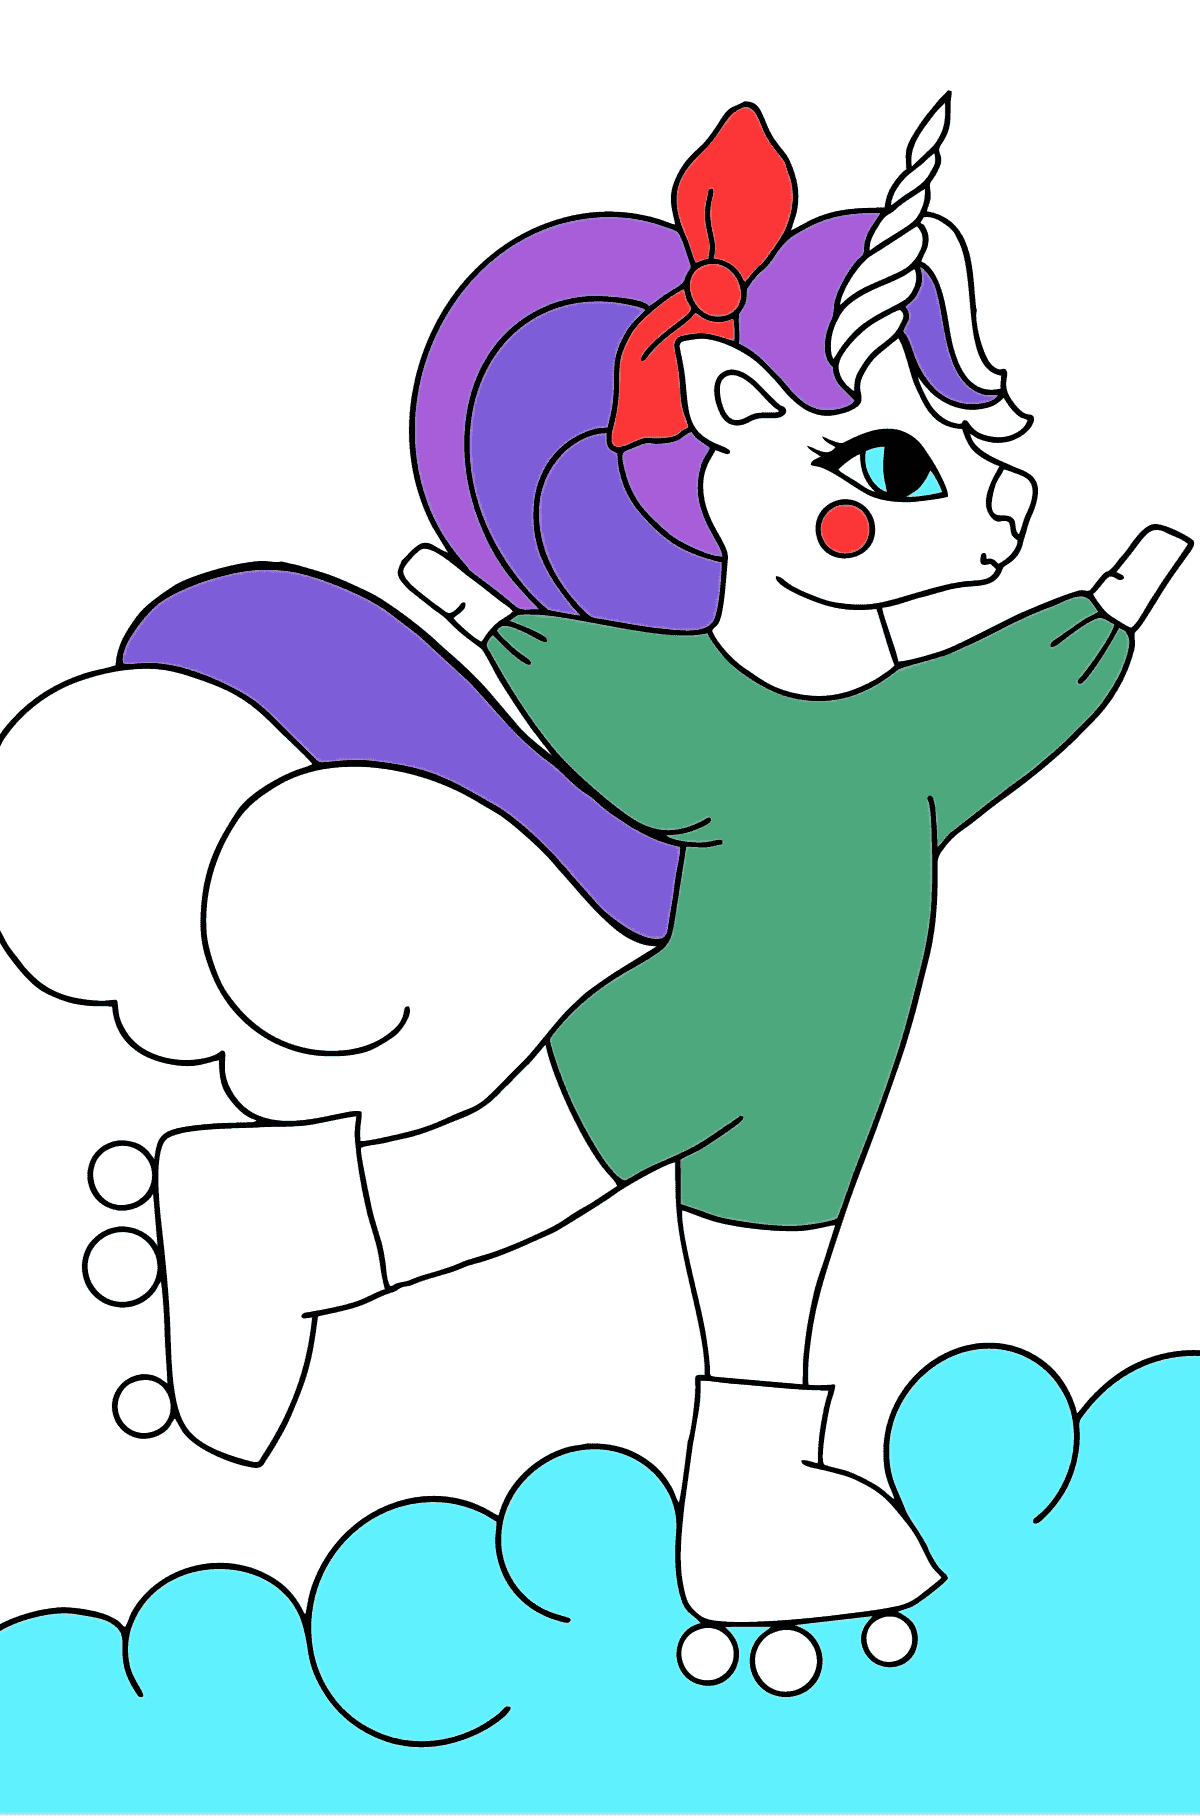 Cute Unicorn to Color for Kids - Coloring Pages for Kids